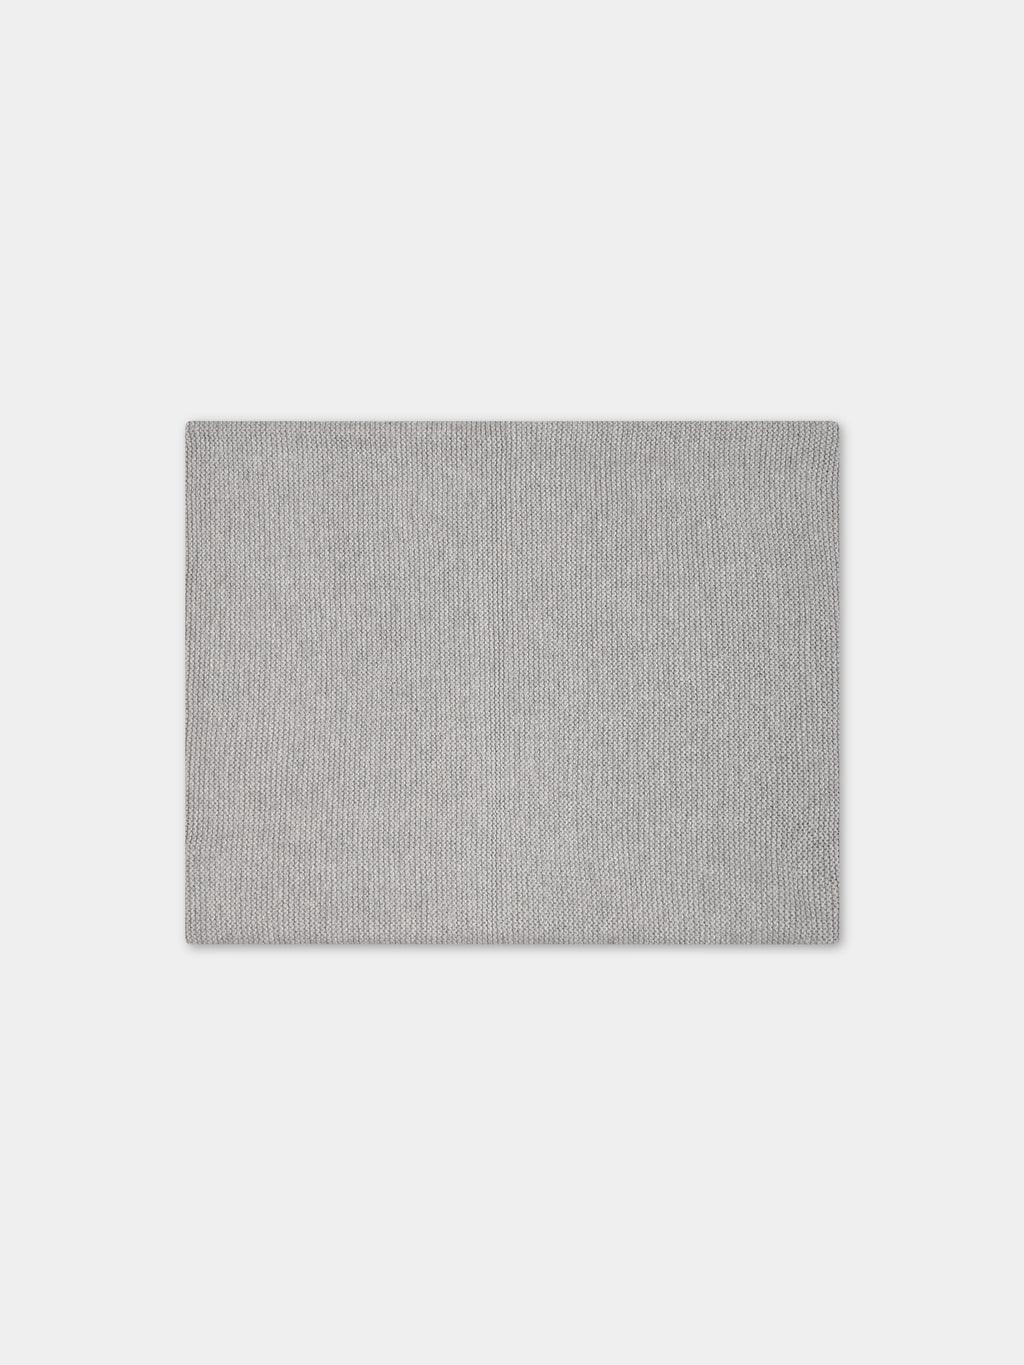 Grey blanket for baby kids with logo